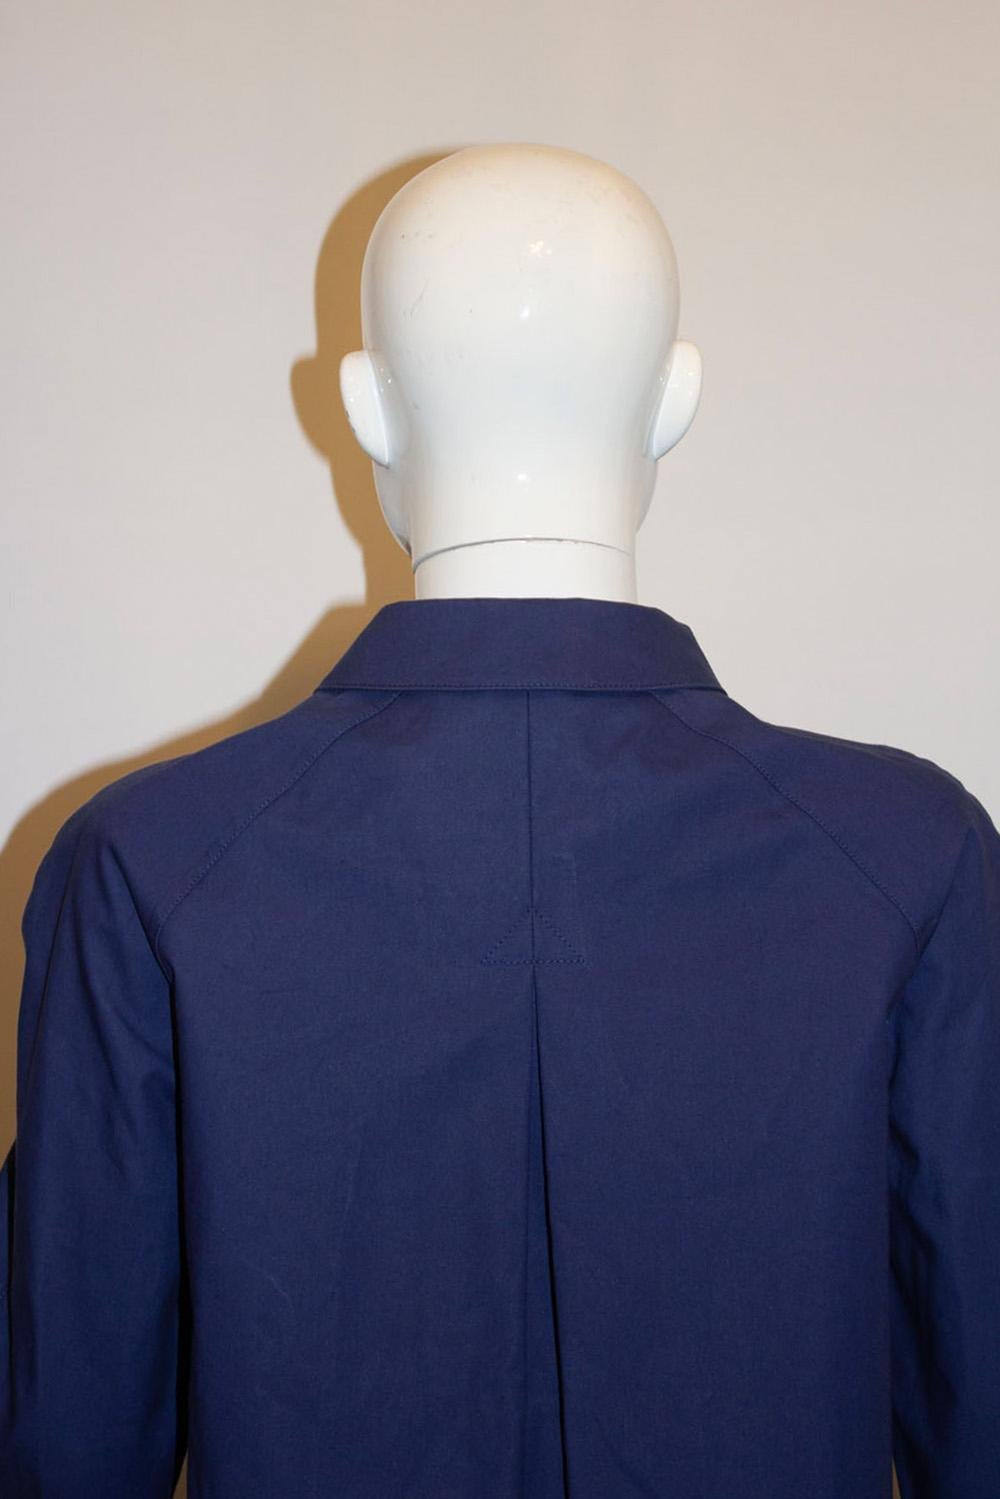 Prada Blue Cotton Jacket In Good Condition For Sale In London, GB